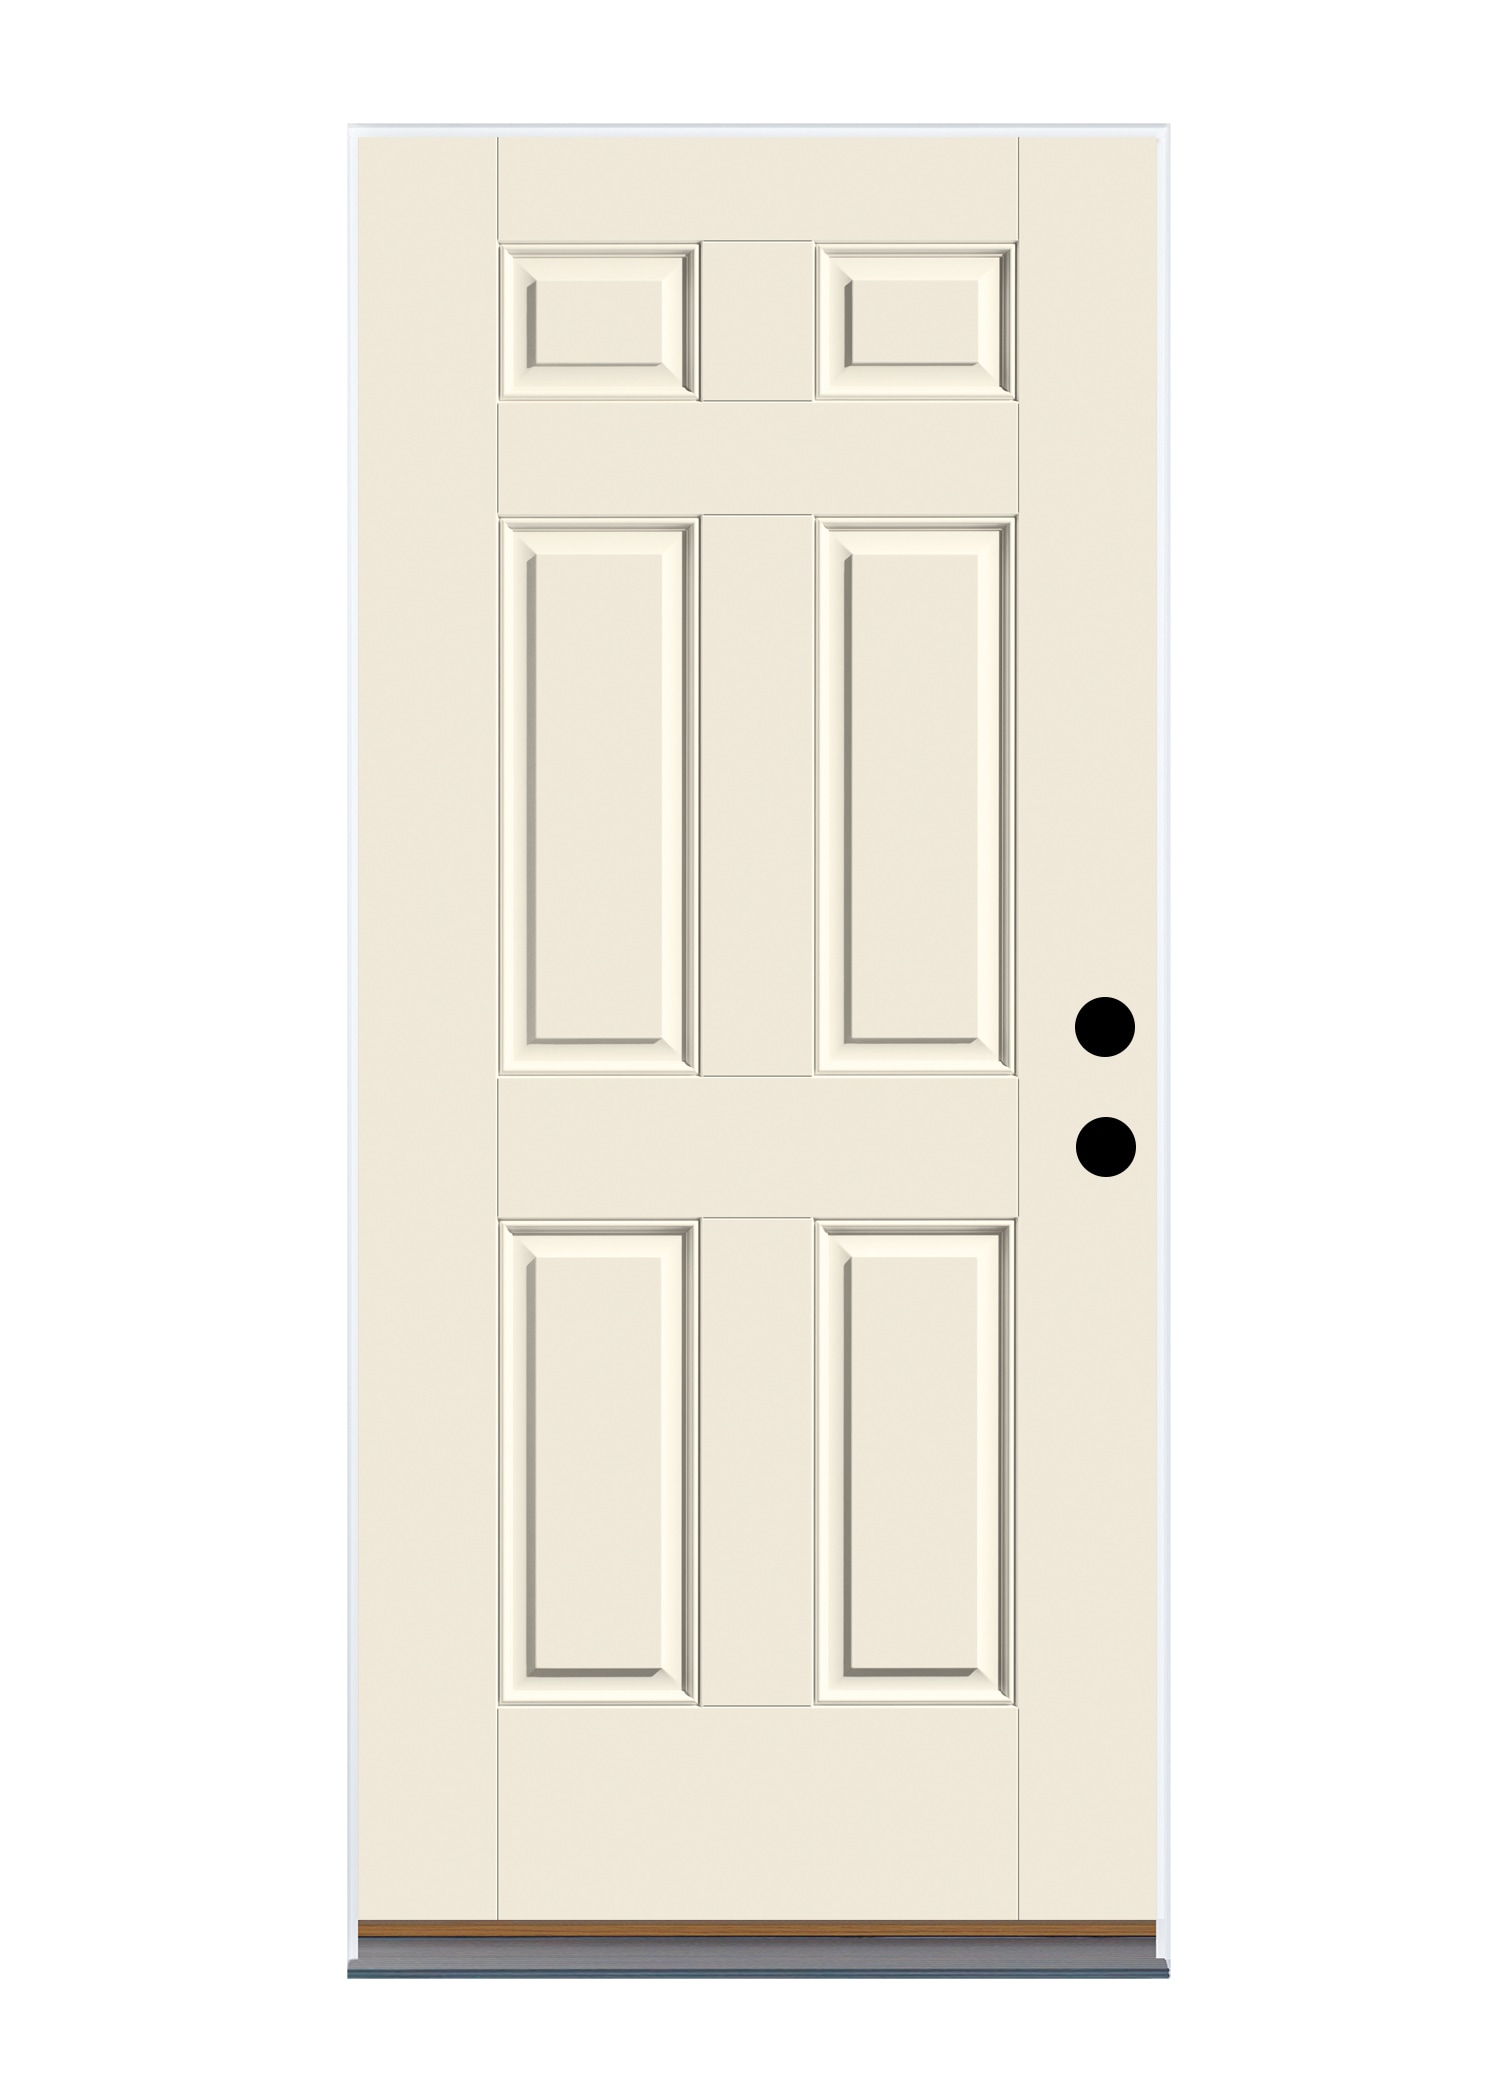 Swing Doors at Rs 450/square feet